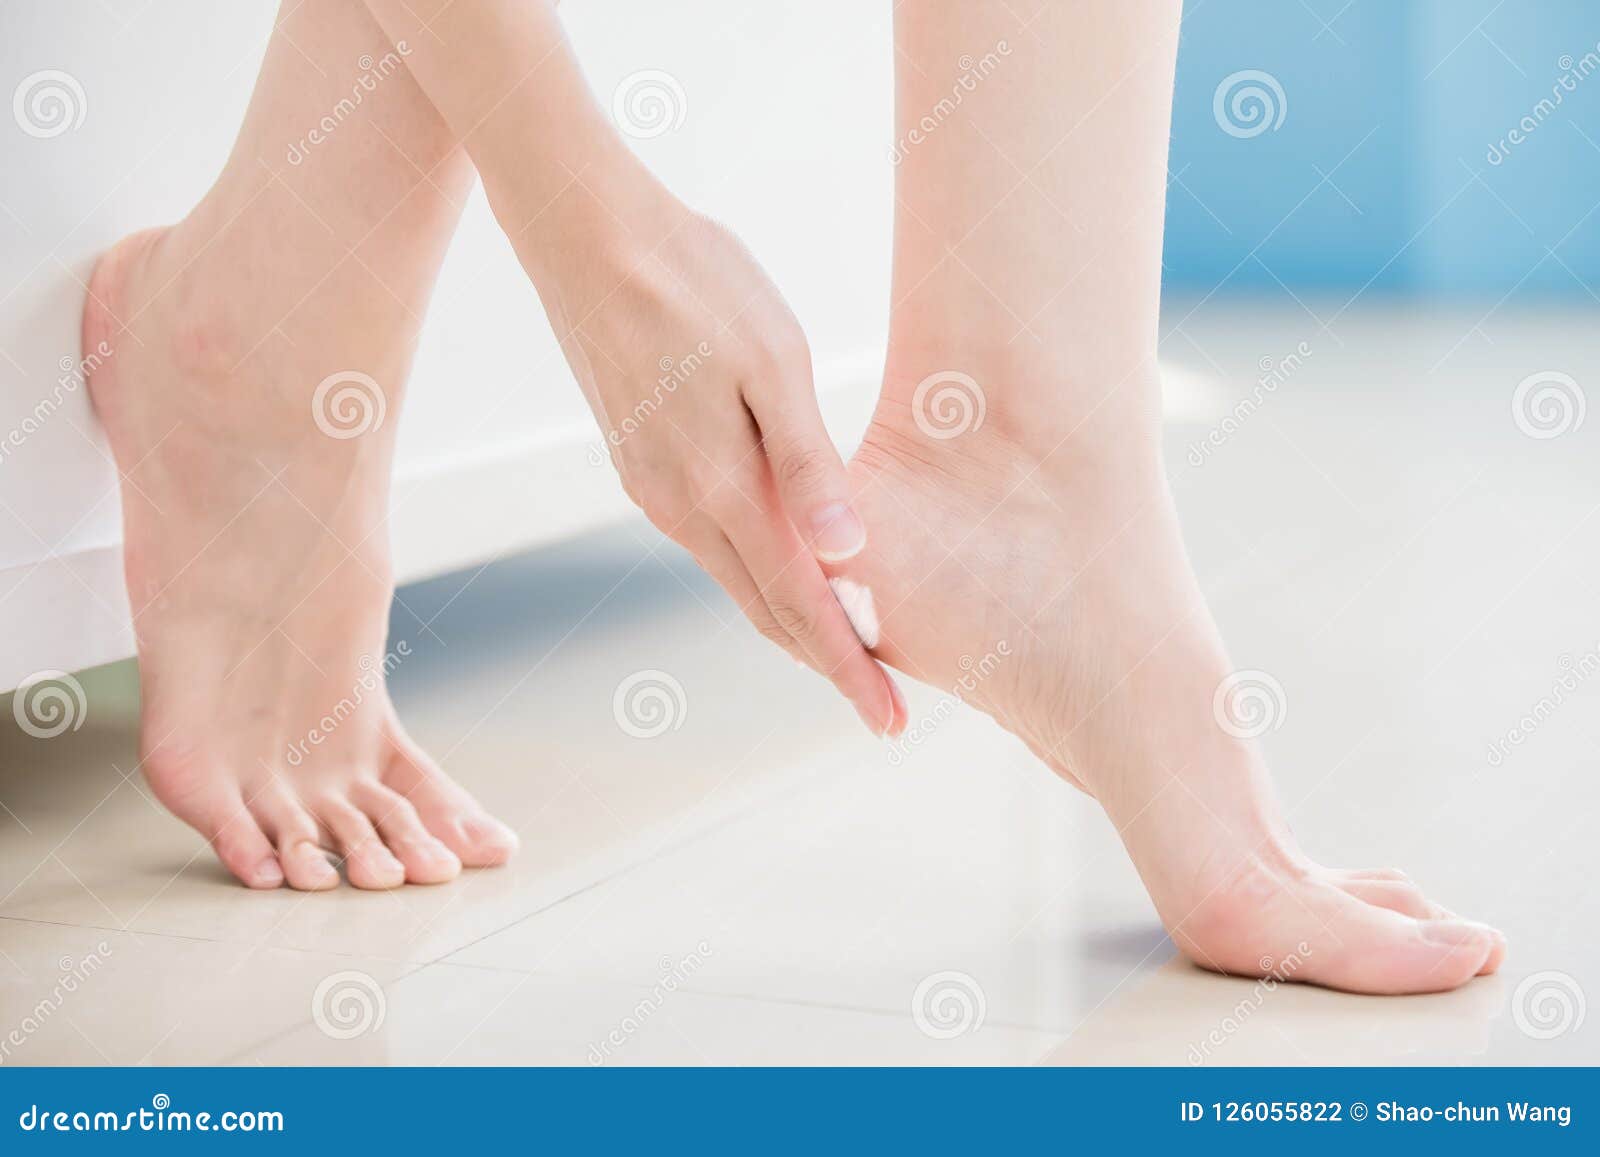 woman apply cream with foot